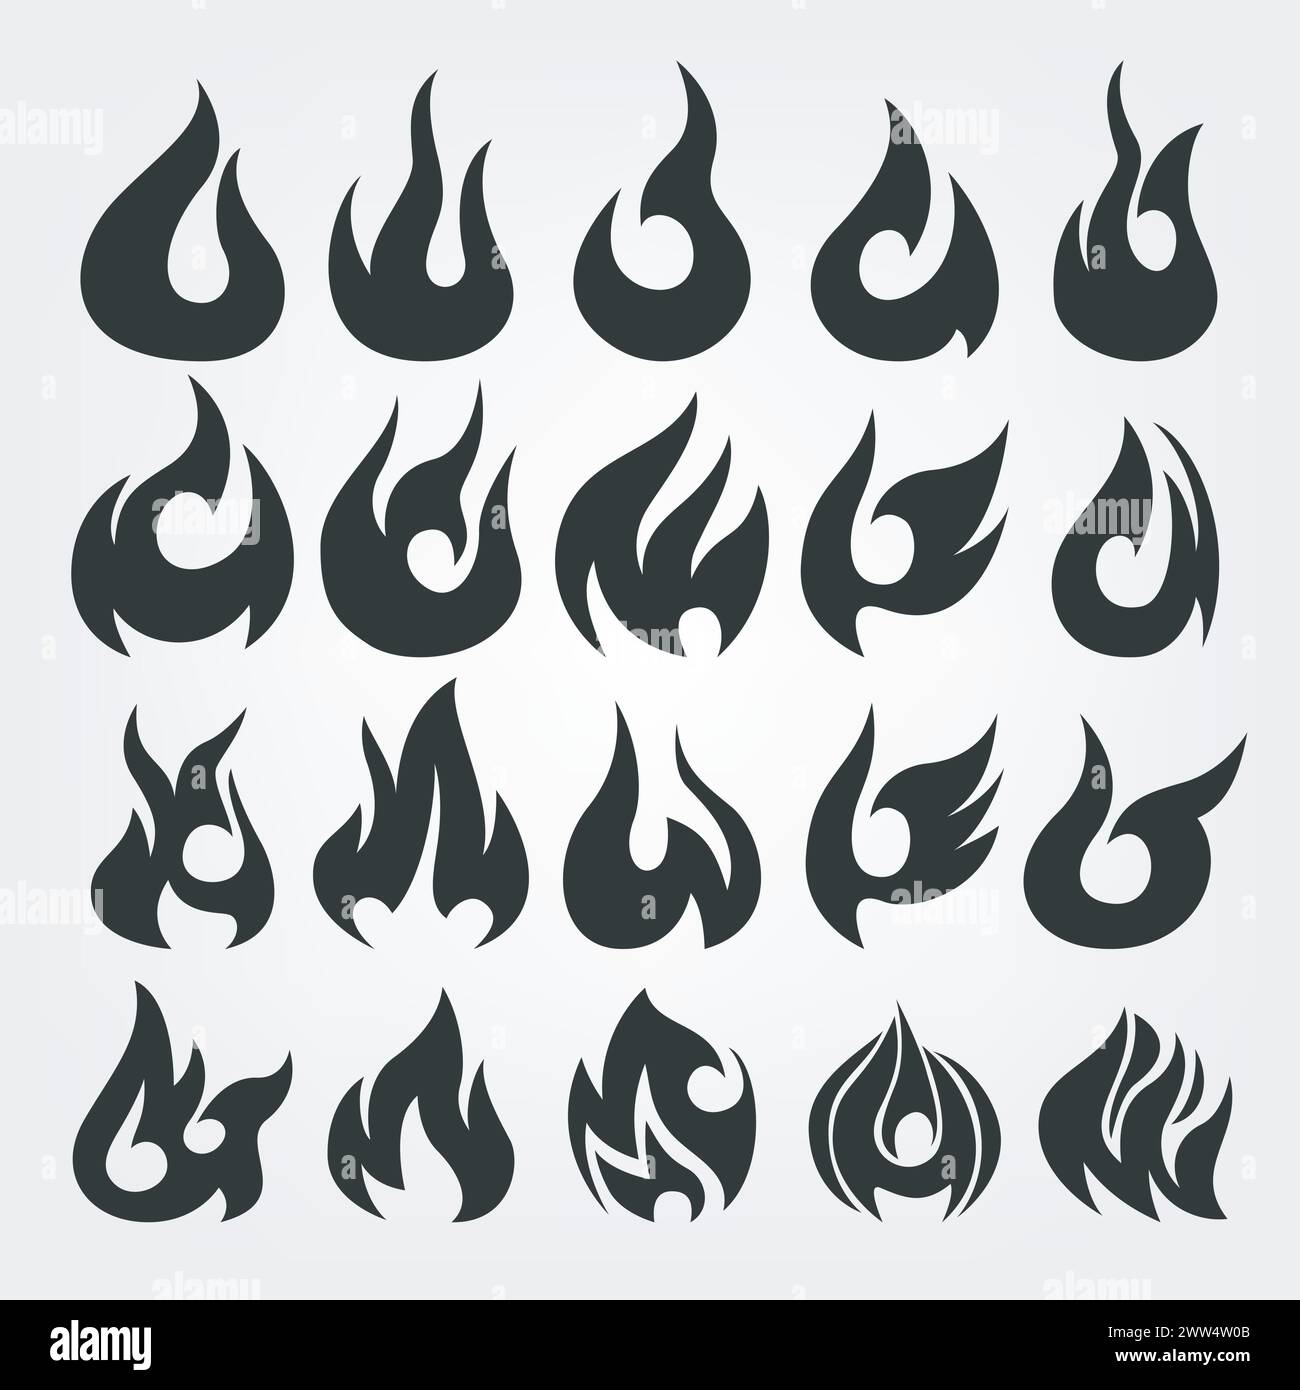 20 Fire Flames Icon Set, Vector Illustration Stock Vector